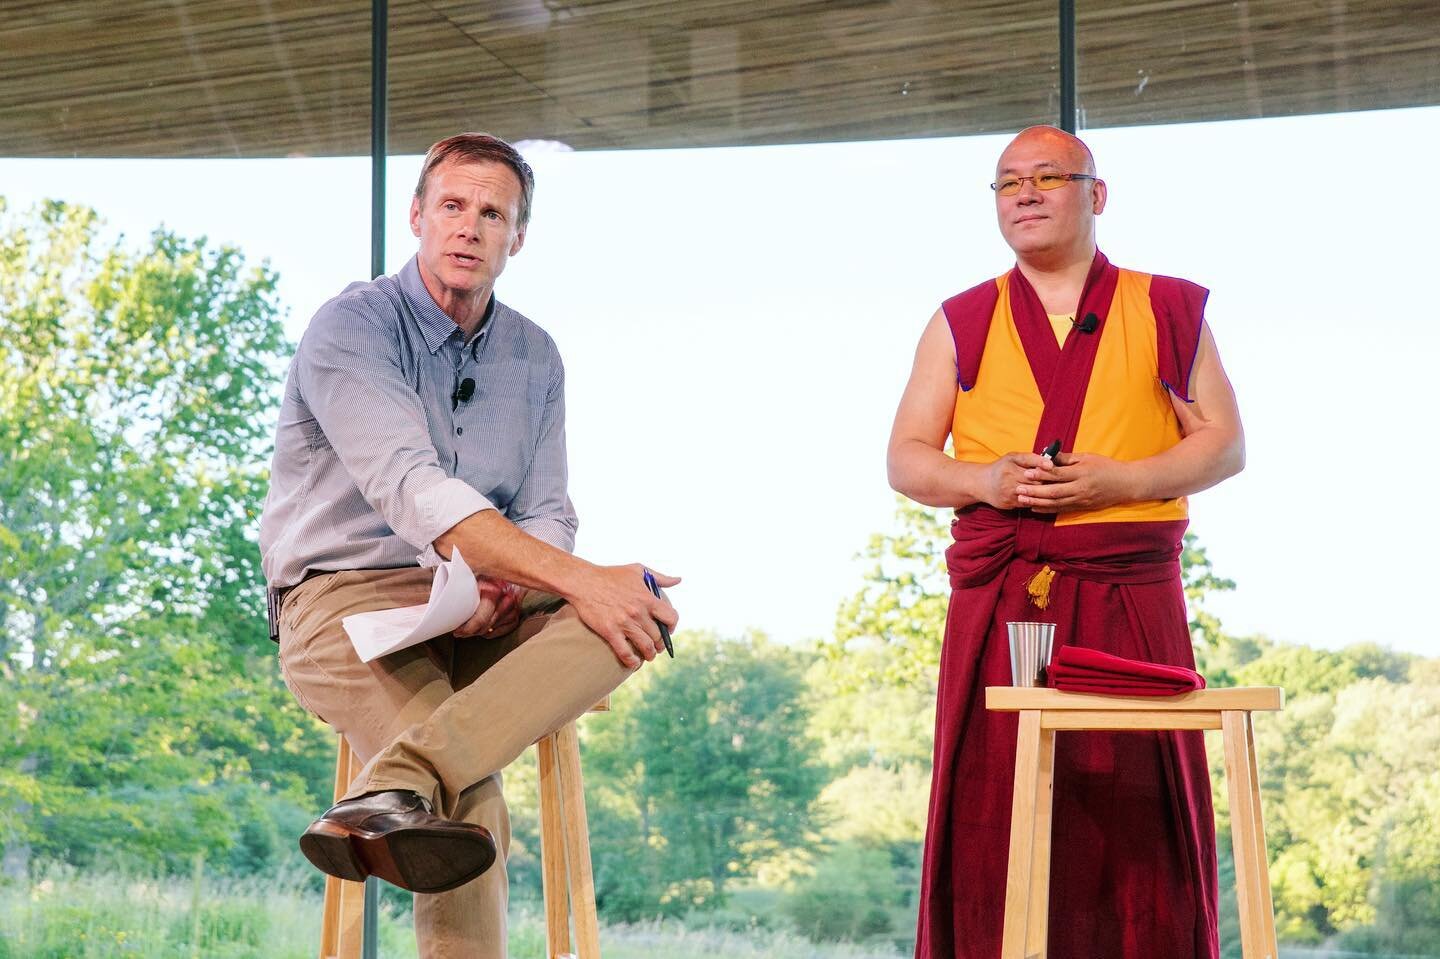 ☸️ Geshe Dhargey, a Buddhist Monk from the Tibetan Buddhist Center for Universal Peace promotes peaceful living through teachings, study, meditation and community service. 

This year, Grace Farms is celebrating its 6th anniversary. 

📷 @gracefarmsc